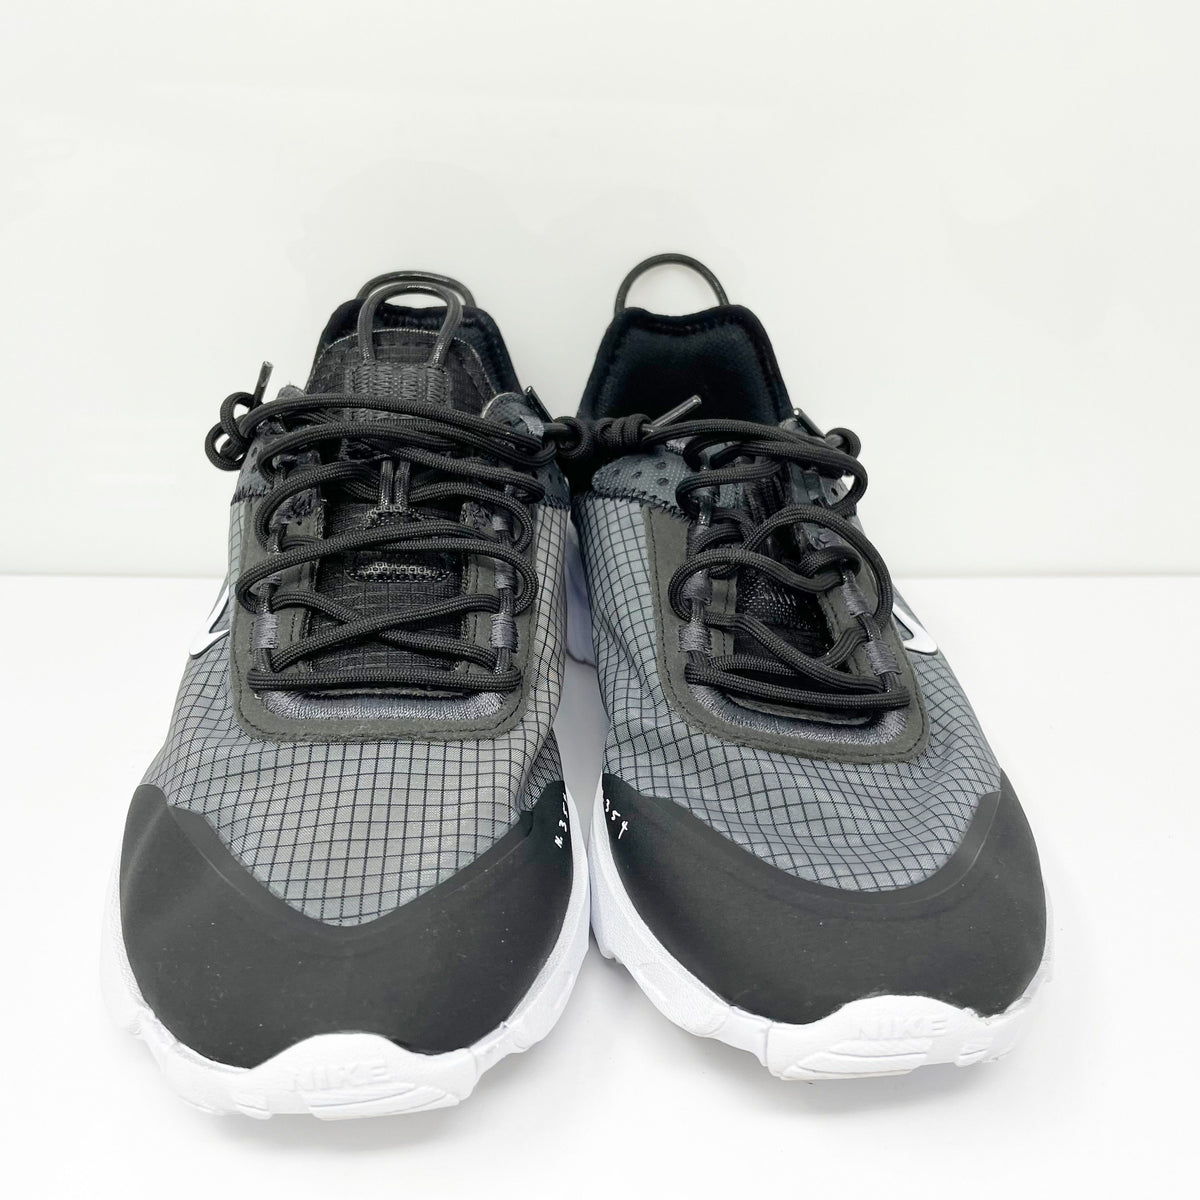 Nike Mens React Live CV1772-003 Black Running Shoes Sneakers Size 7.5 ...